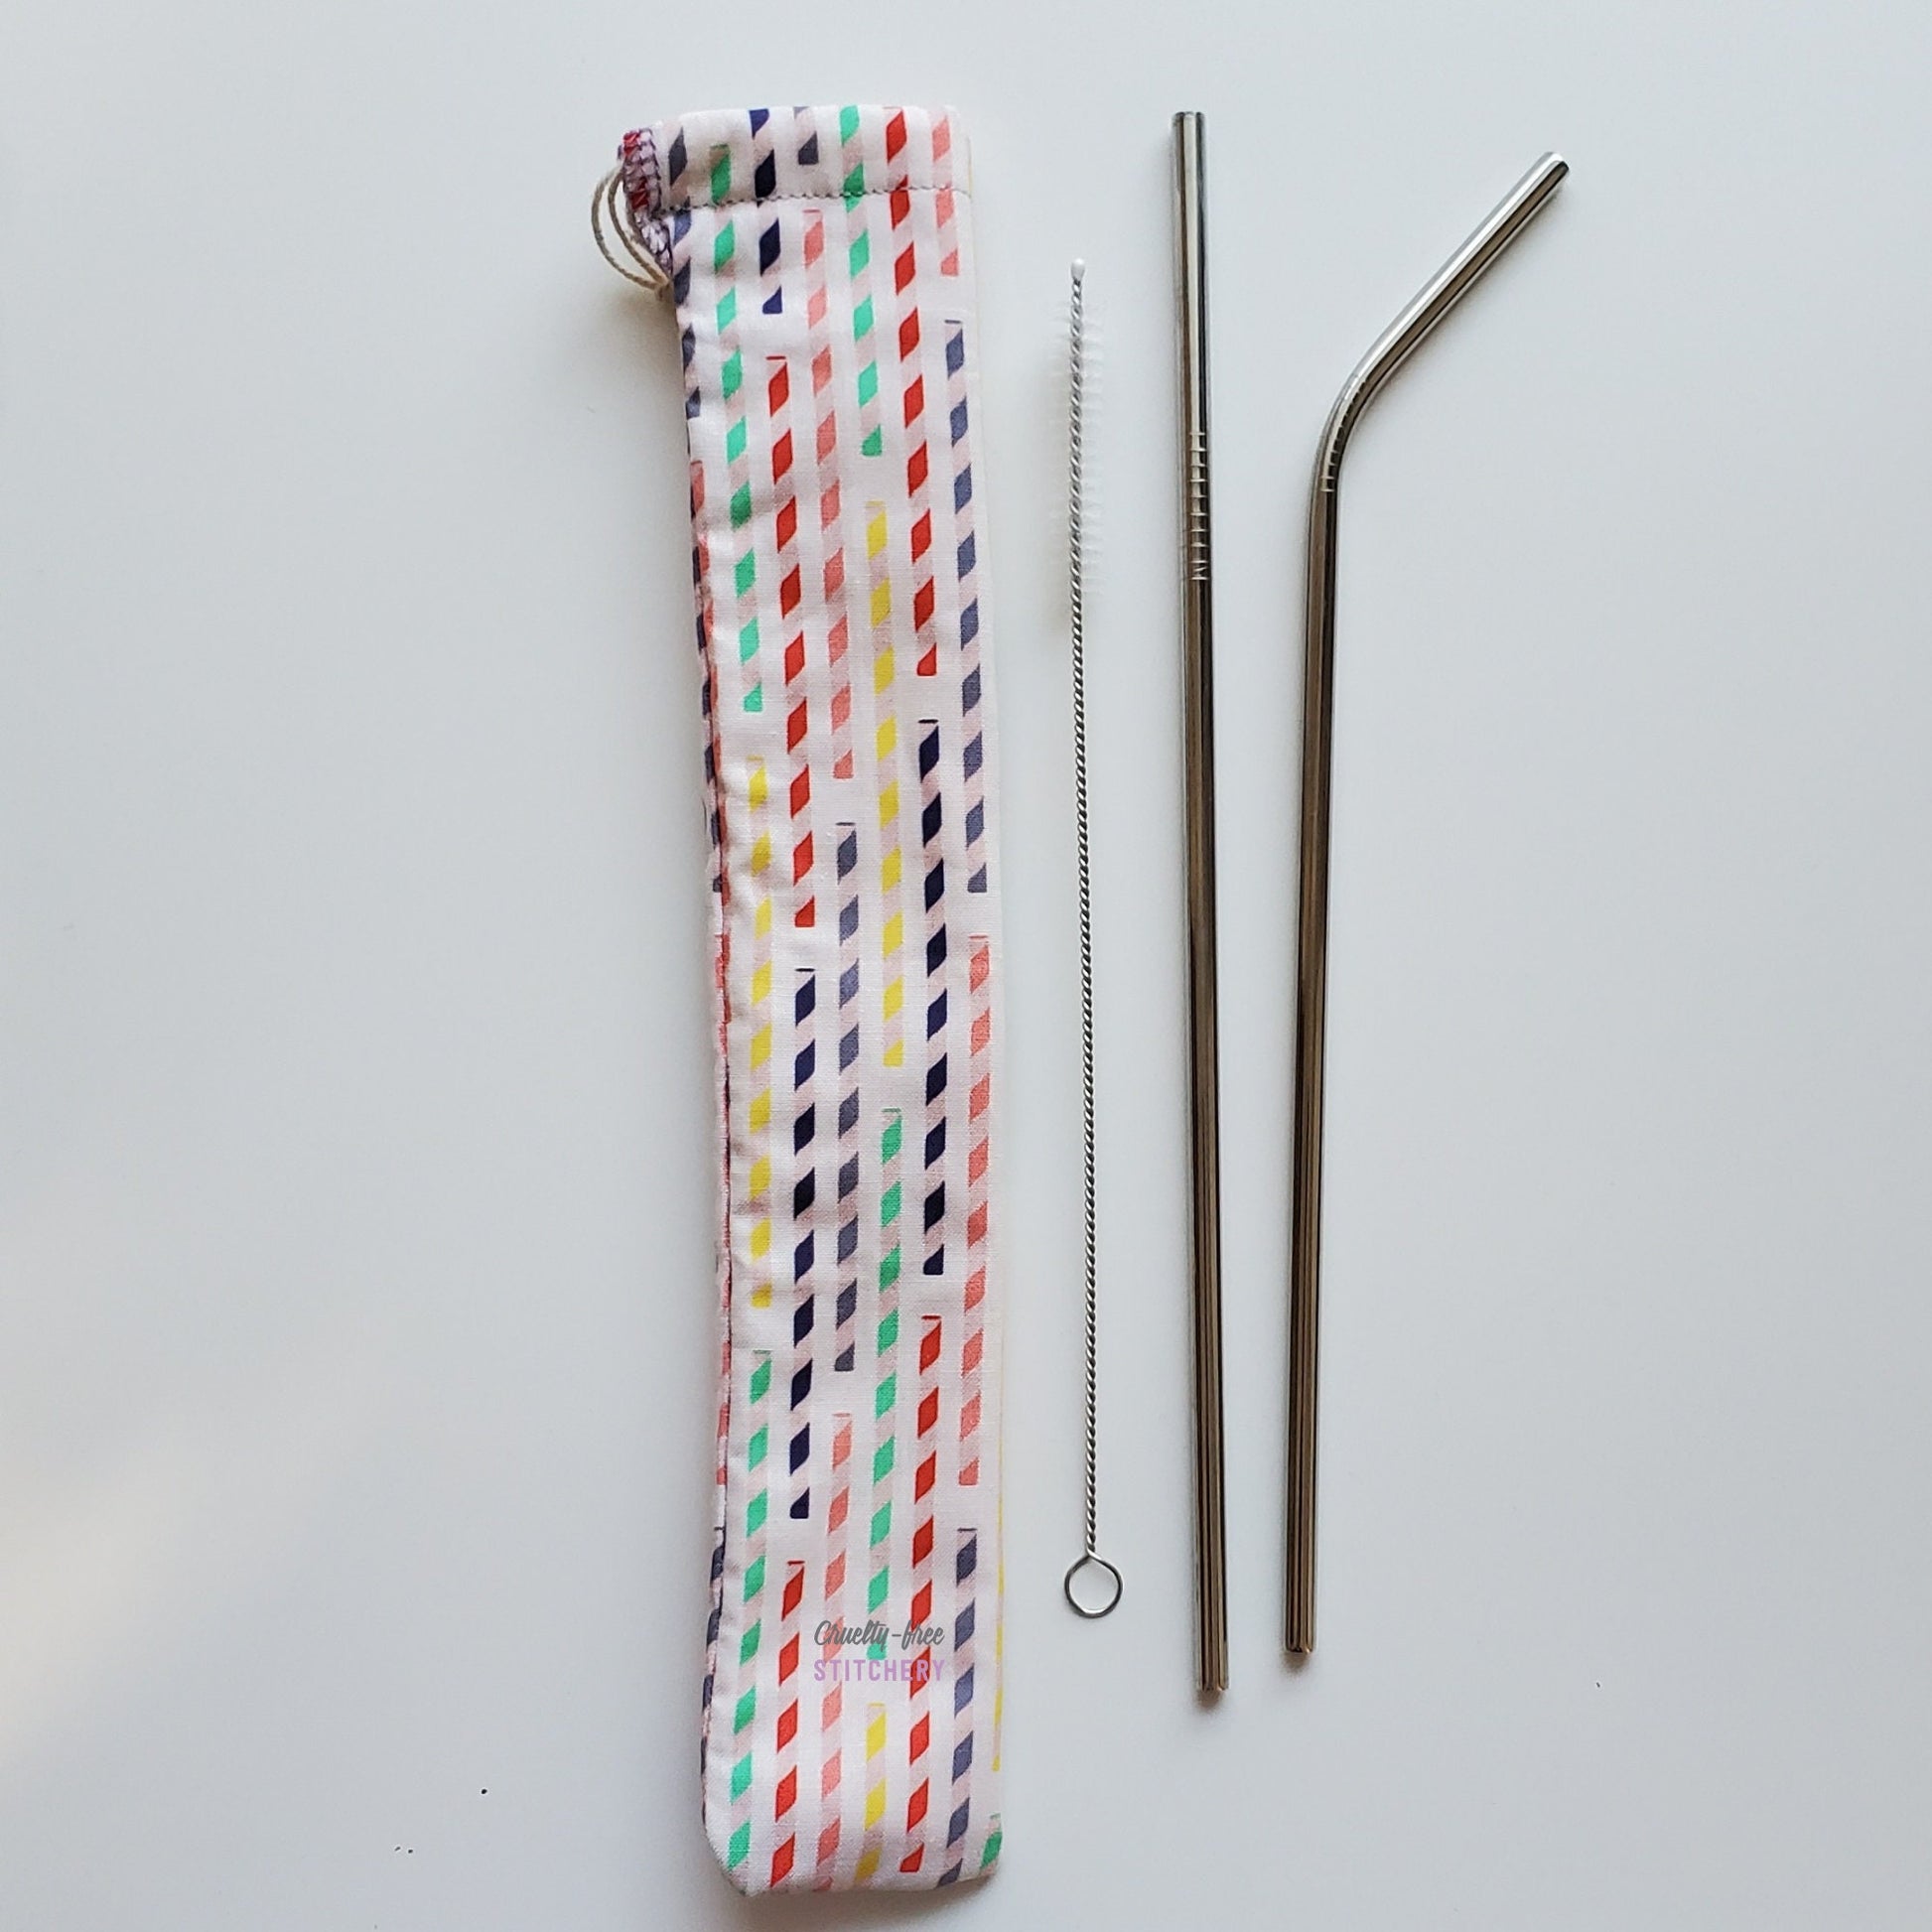 Reusable straw pouch in the same paper straw print laying vertically next to a straw cleaner brush, a straight stainless steel straw, and a bent stainless steel straw.